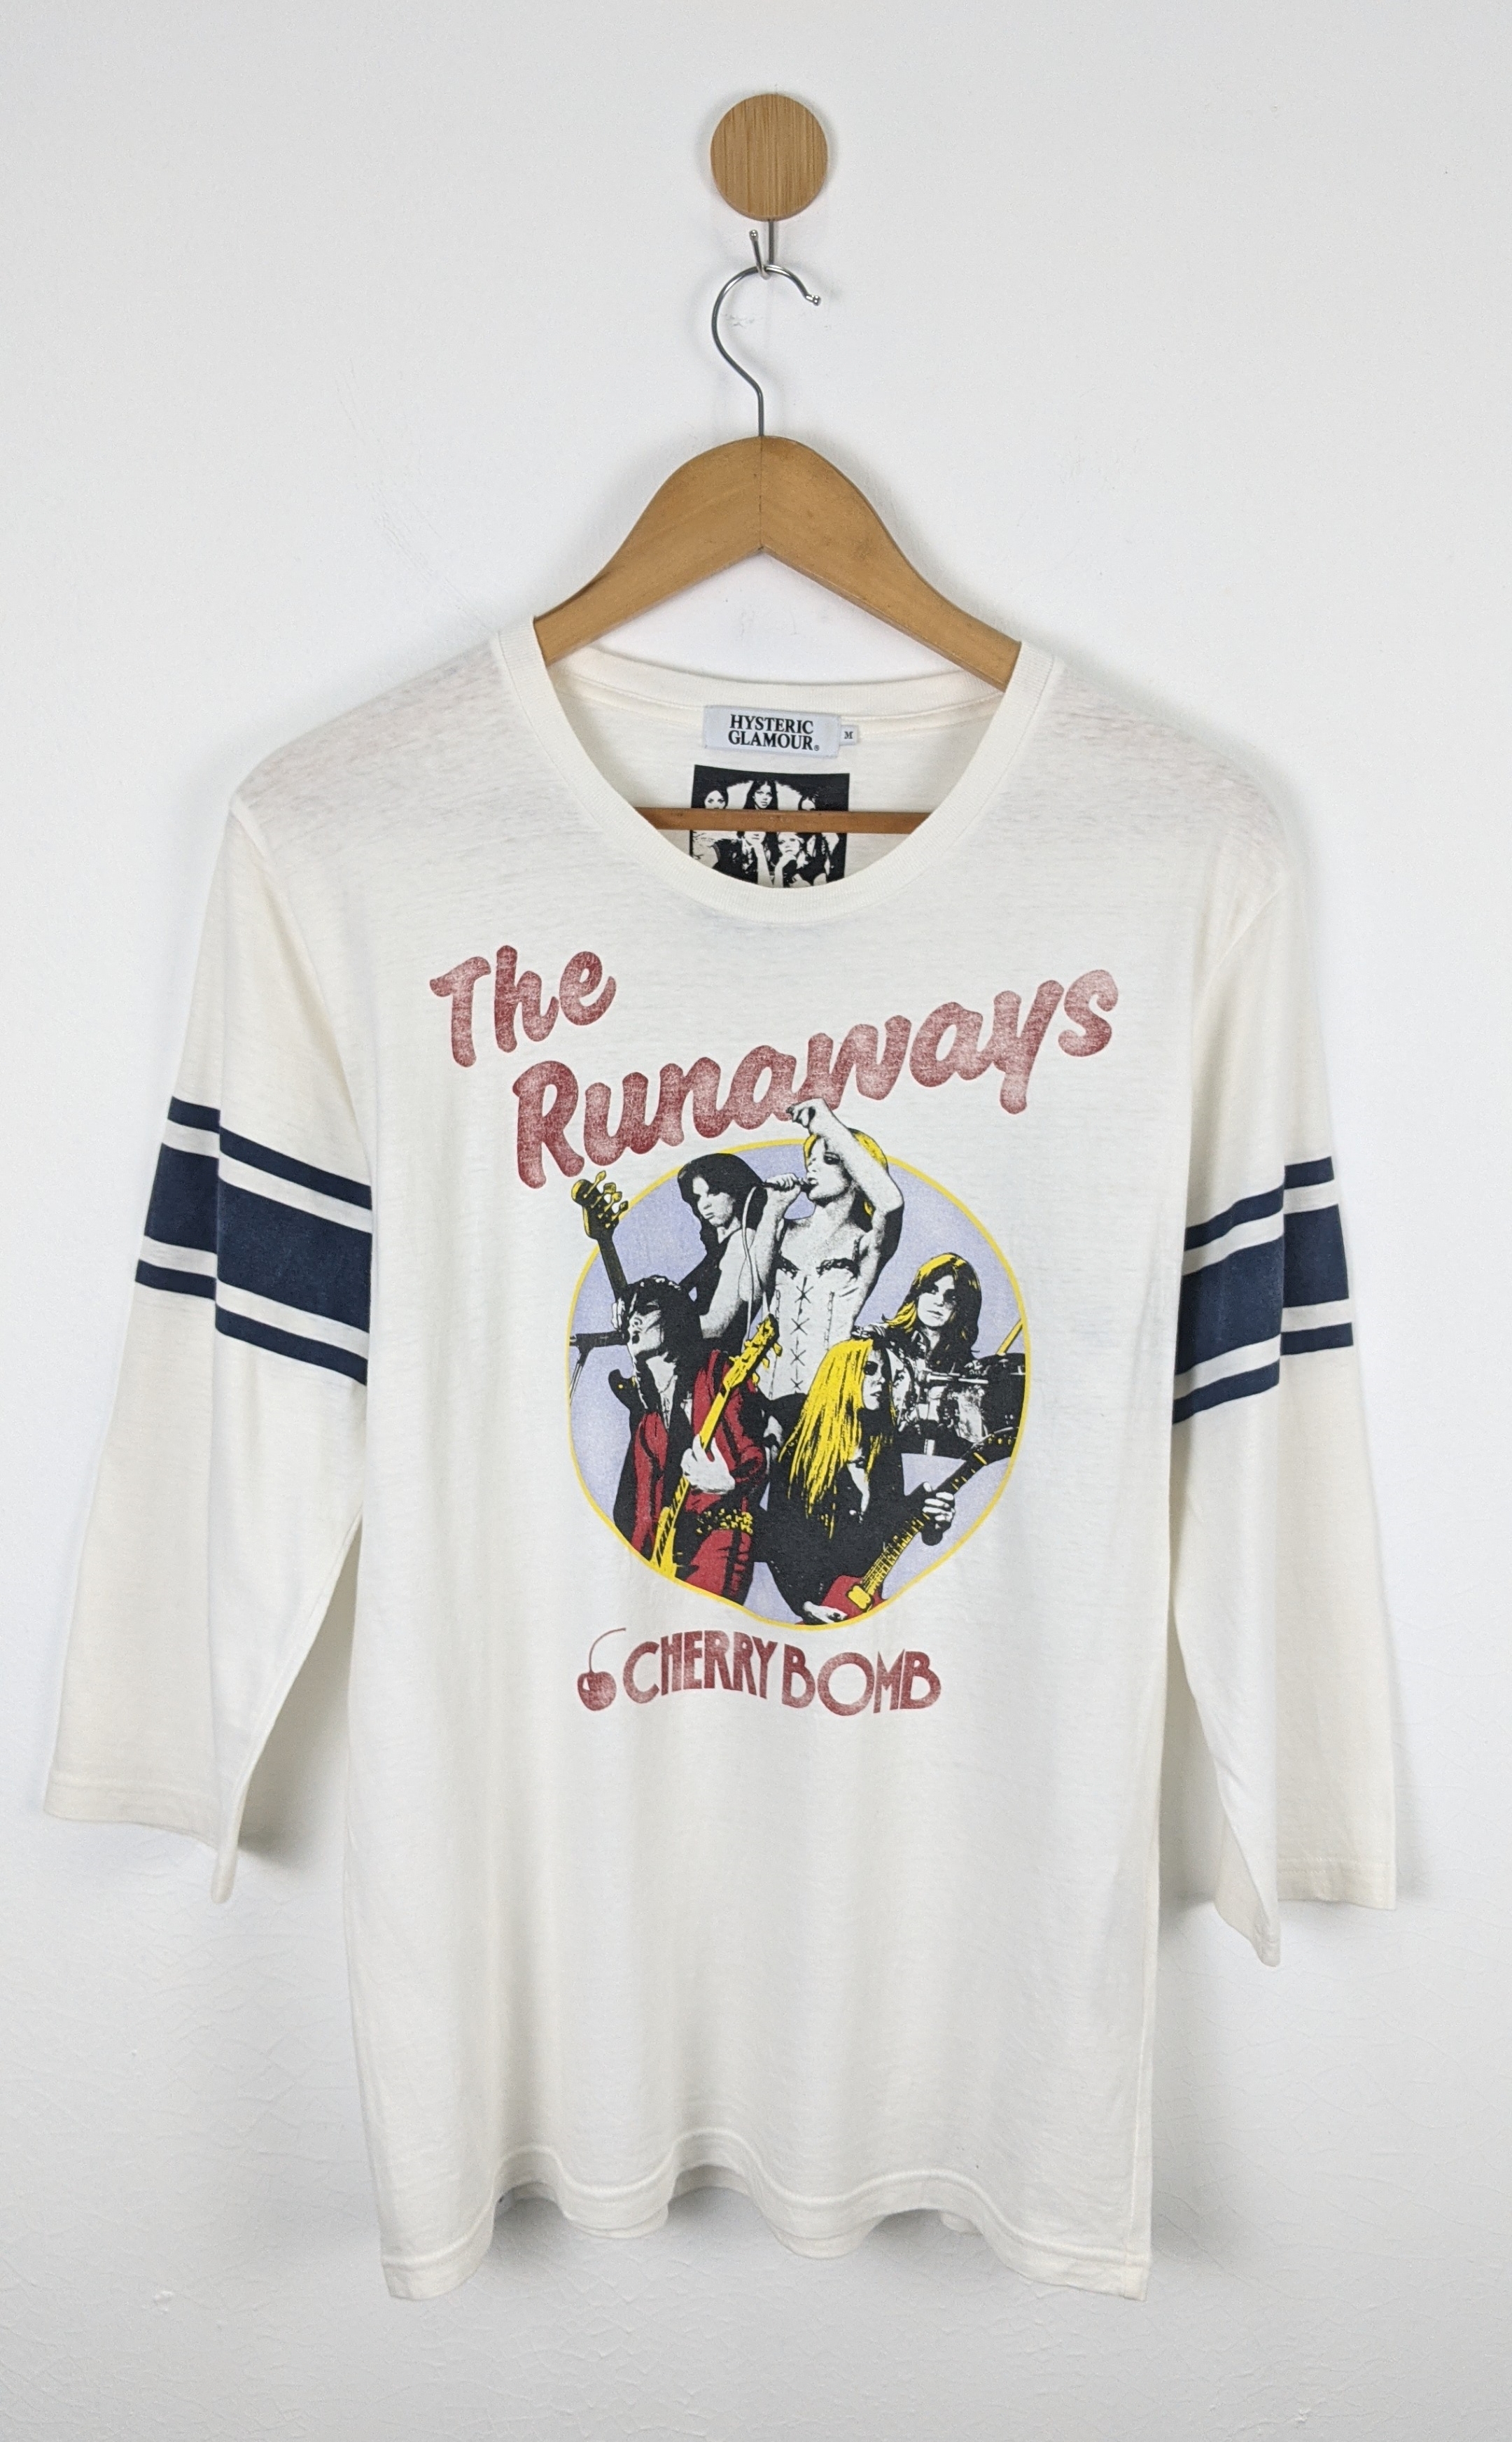 Hysteric Glamour Hysteric Glamour The Runaways Cherry Bomb shirt